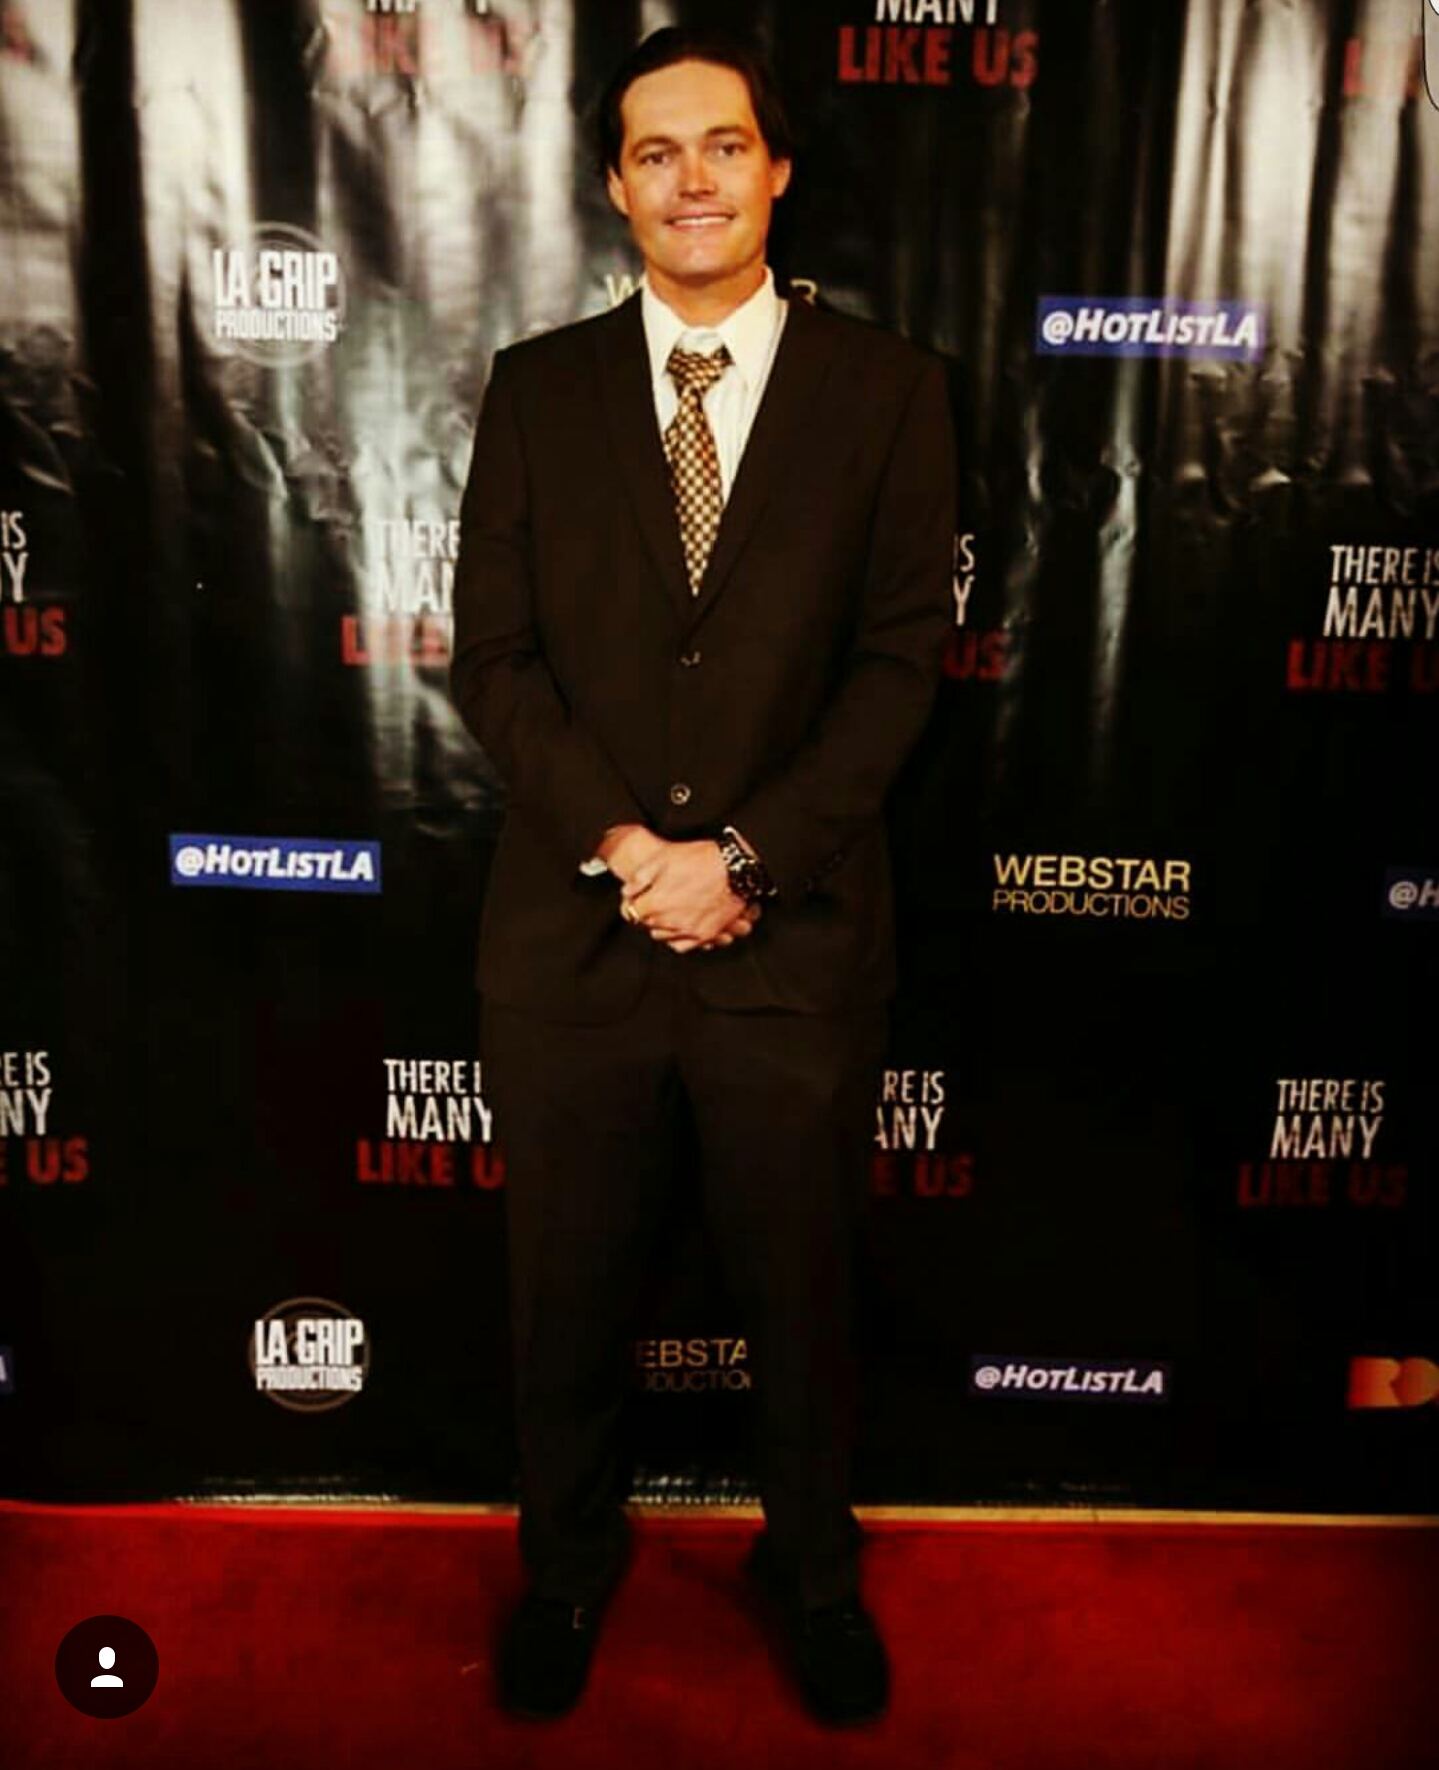 Michael D. Reynolds at the movie premiere of 